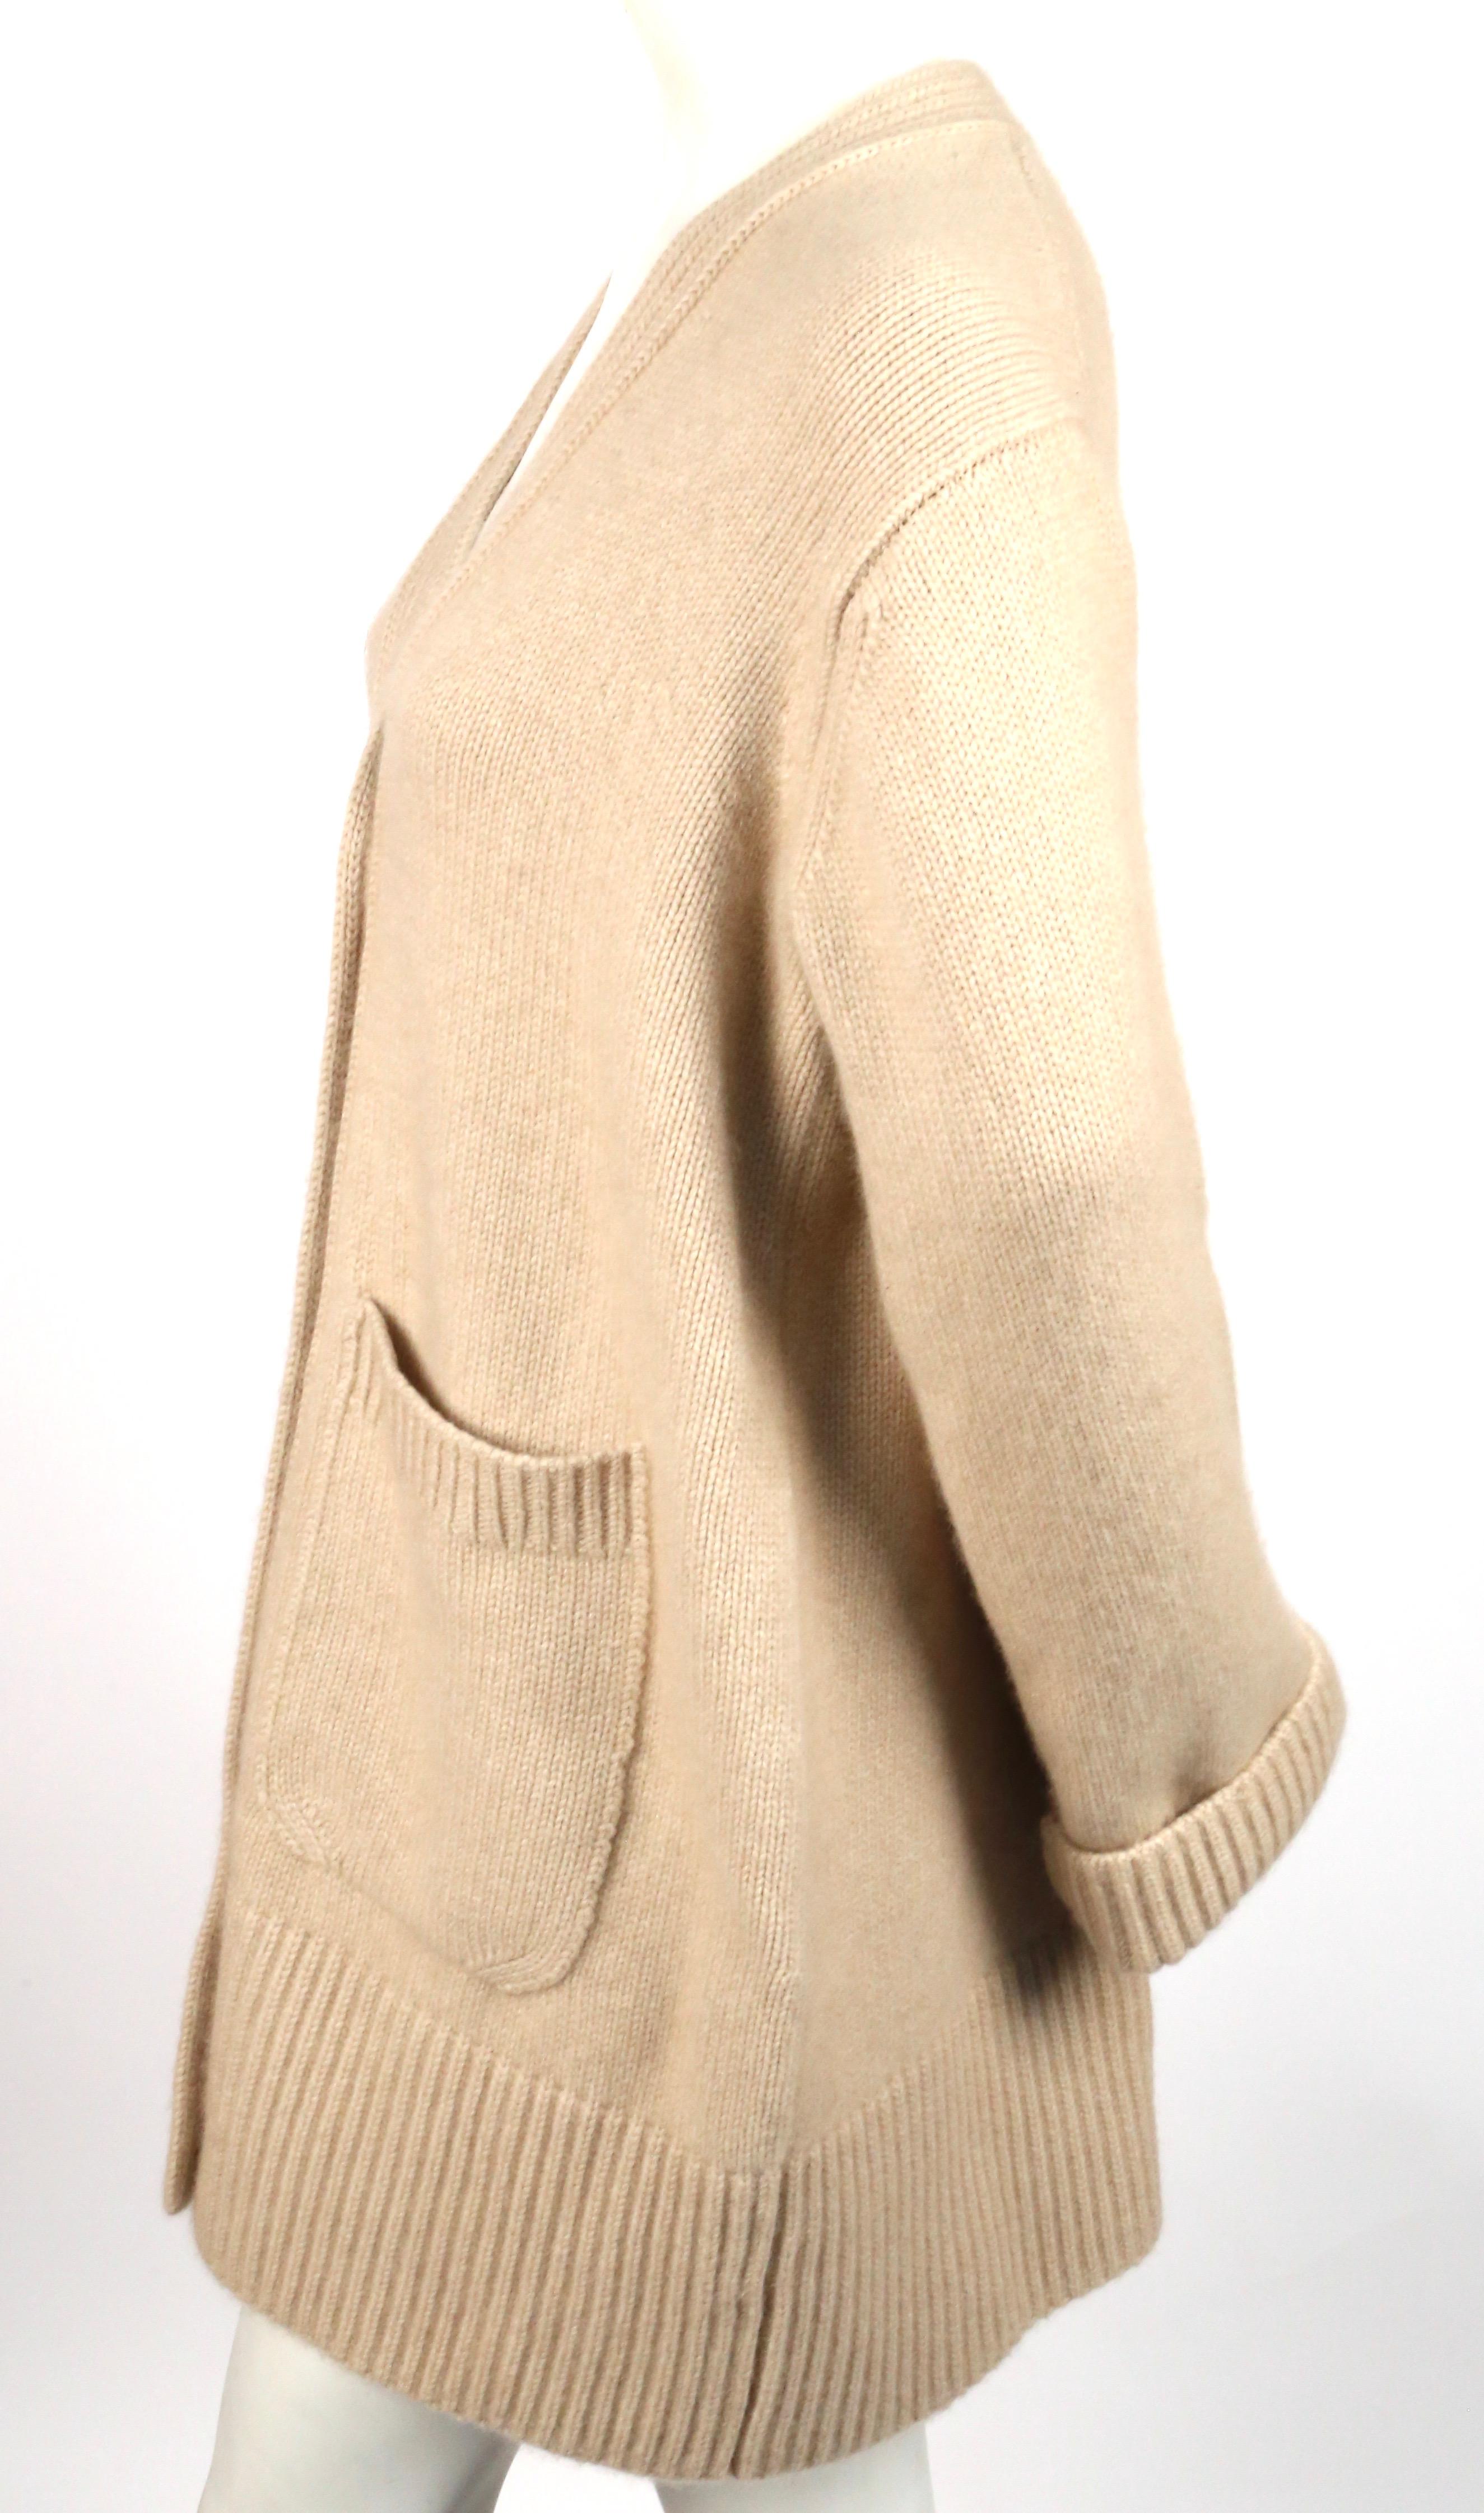 Oversized cashmere cardigan sweater with large patch pockets designed by Khaite. Color is 'butter'. New with tags. Fits a size S or M. Approximate measurements: Approximate measurements: bust 45-46